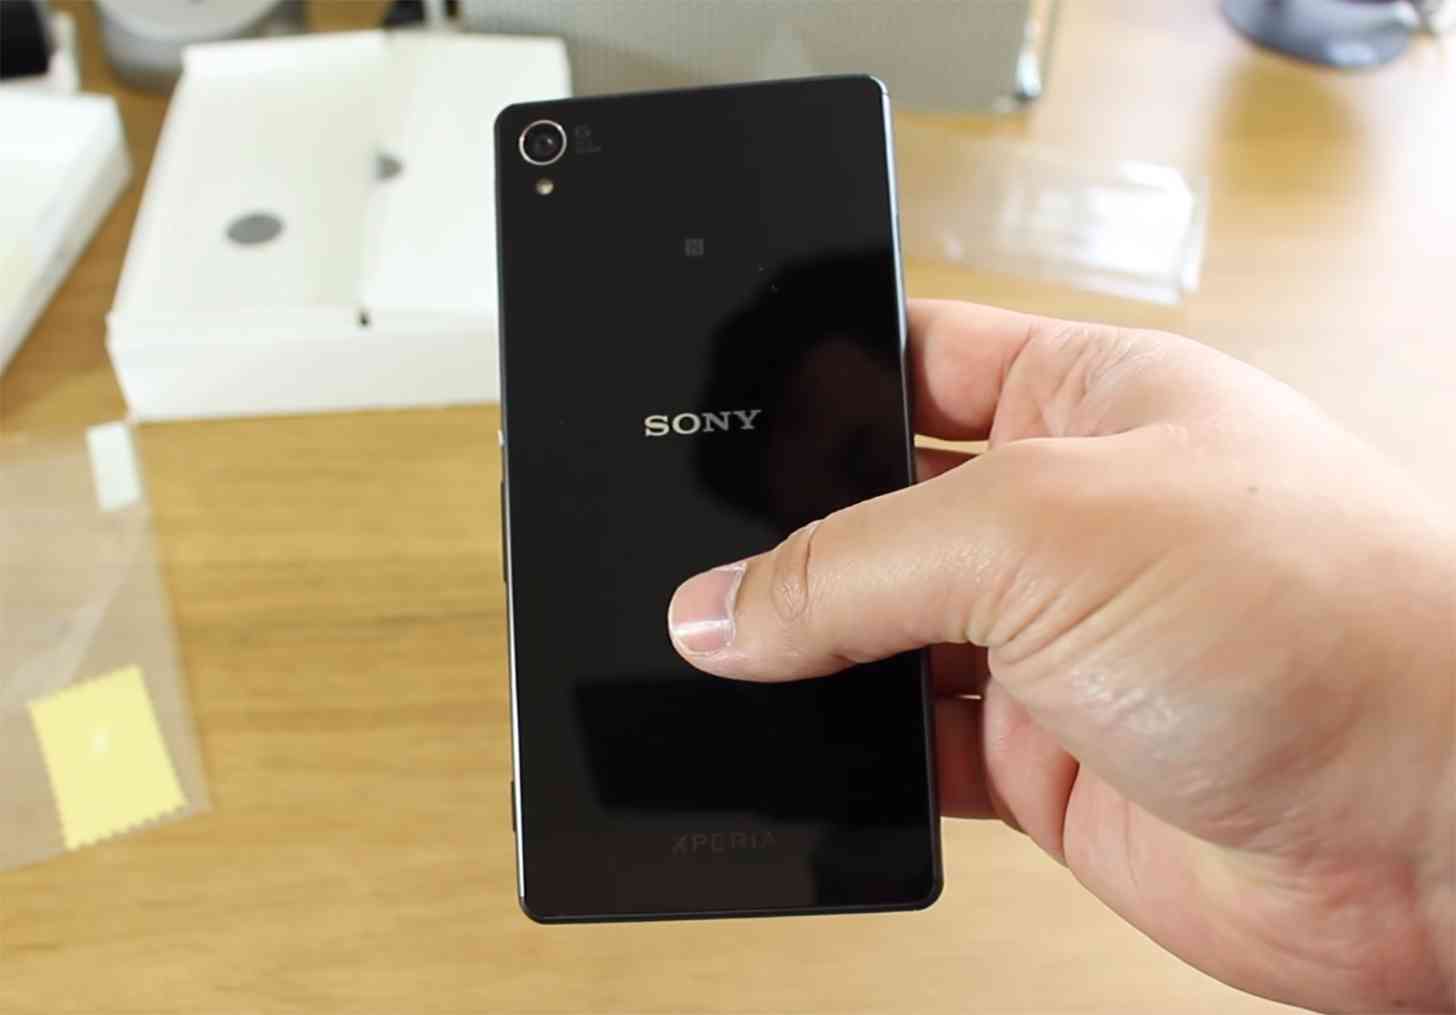 Sony Xperia Z3 hands-on video